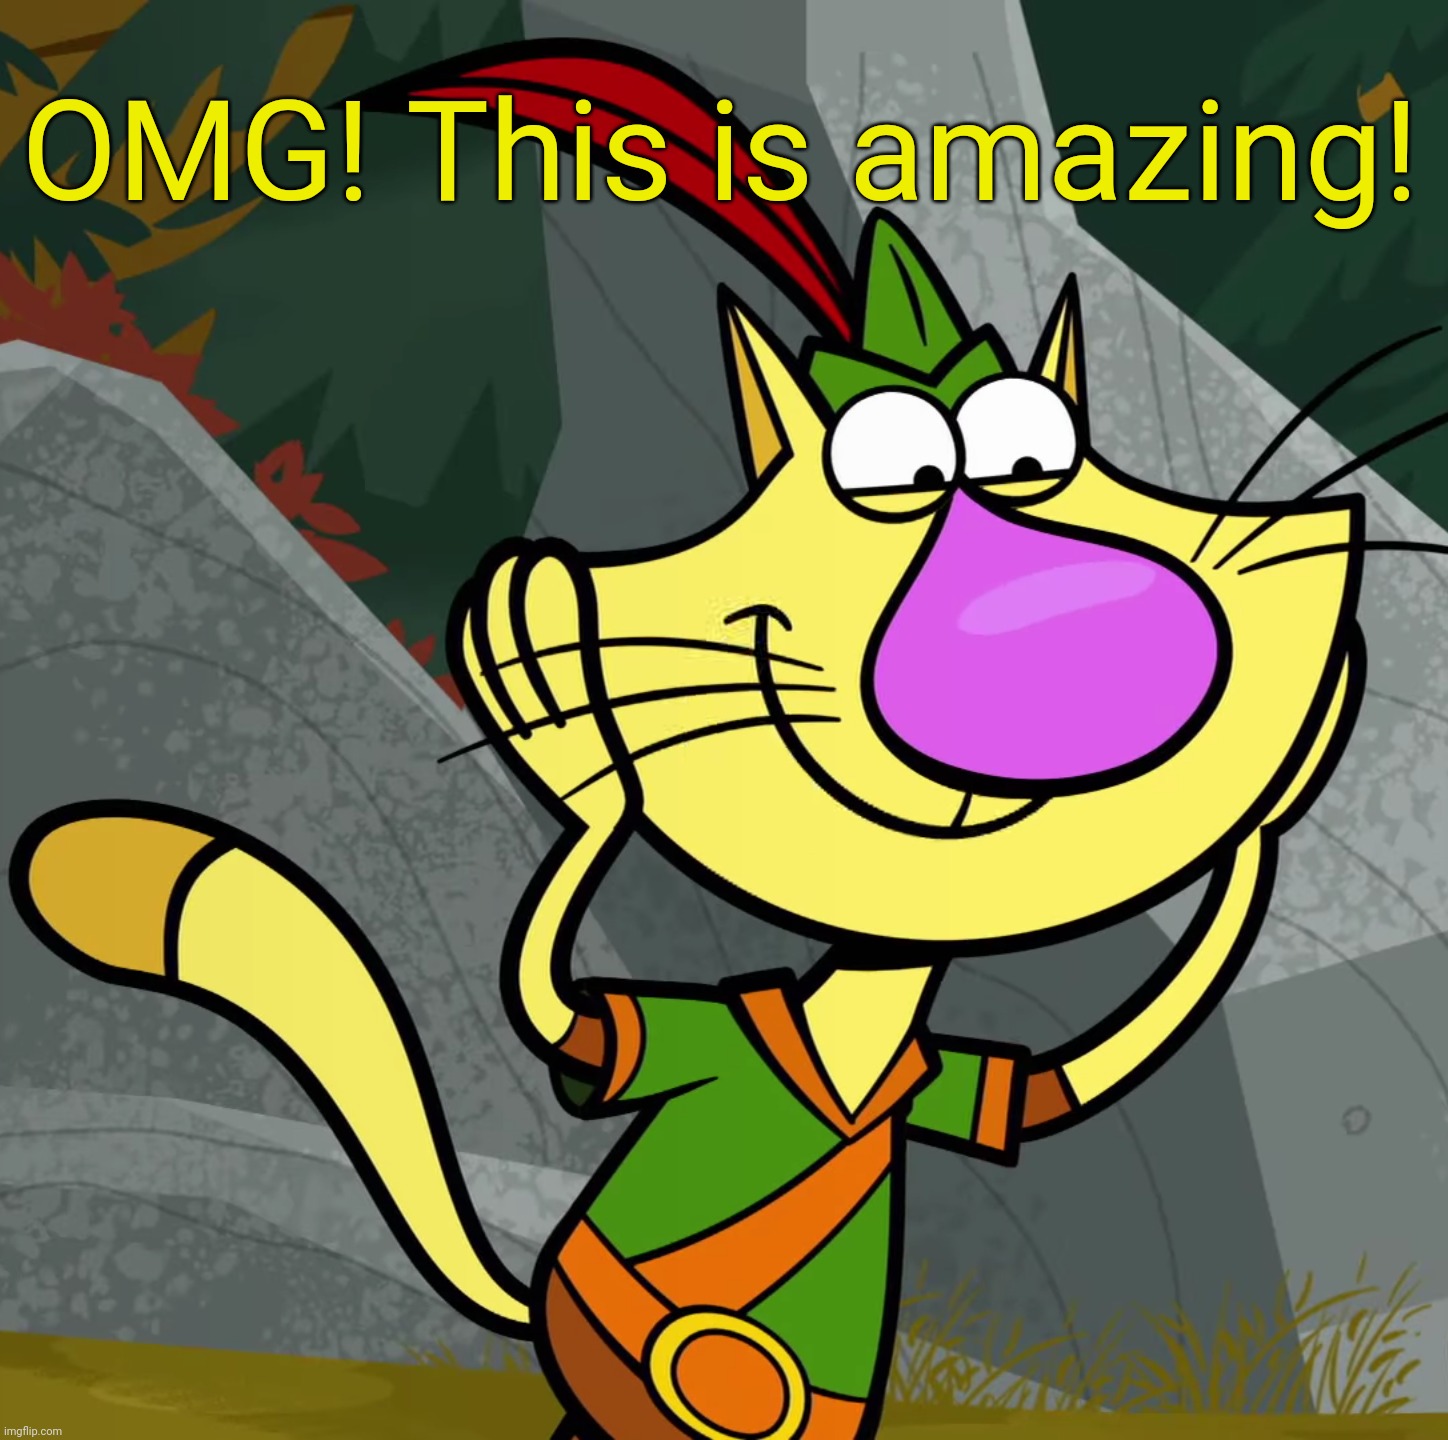 OMG! (Nature Cat) | OMG! This is amazing! | image tagged in omg nature cat | made w/ Imgflip meme maker